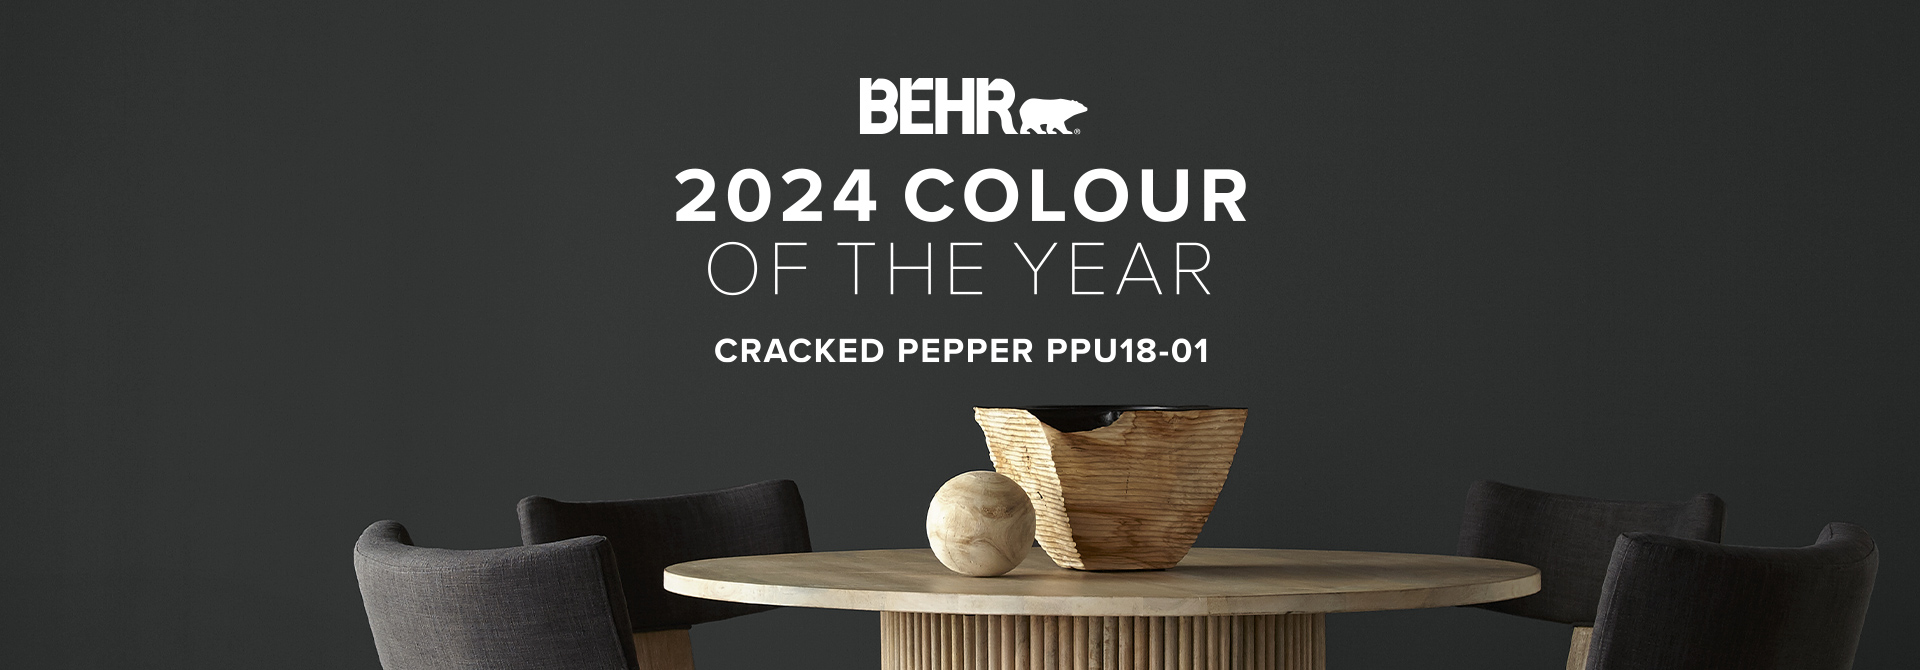 Dining room painted in Cracked Pepper, featuring Behr 2024 Colour of the Year, Cracked Pepper